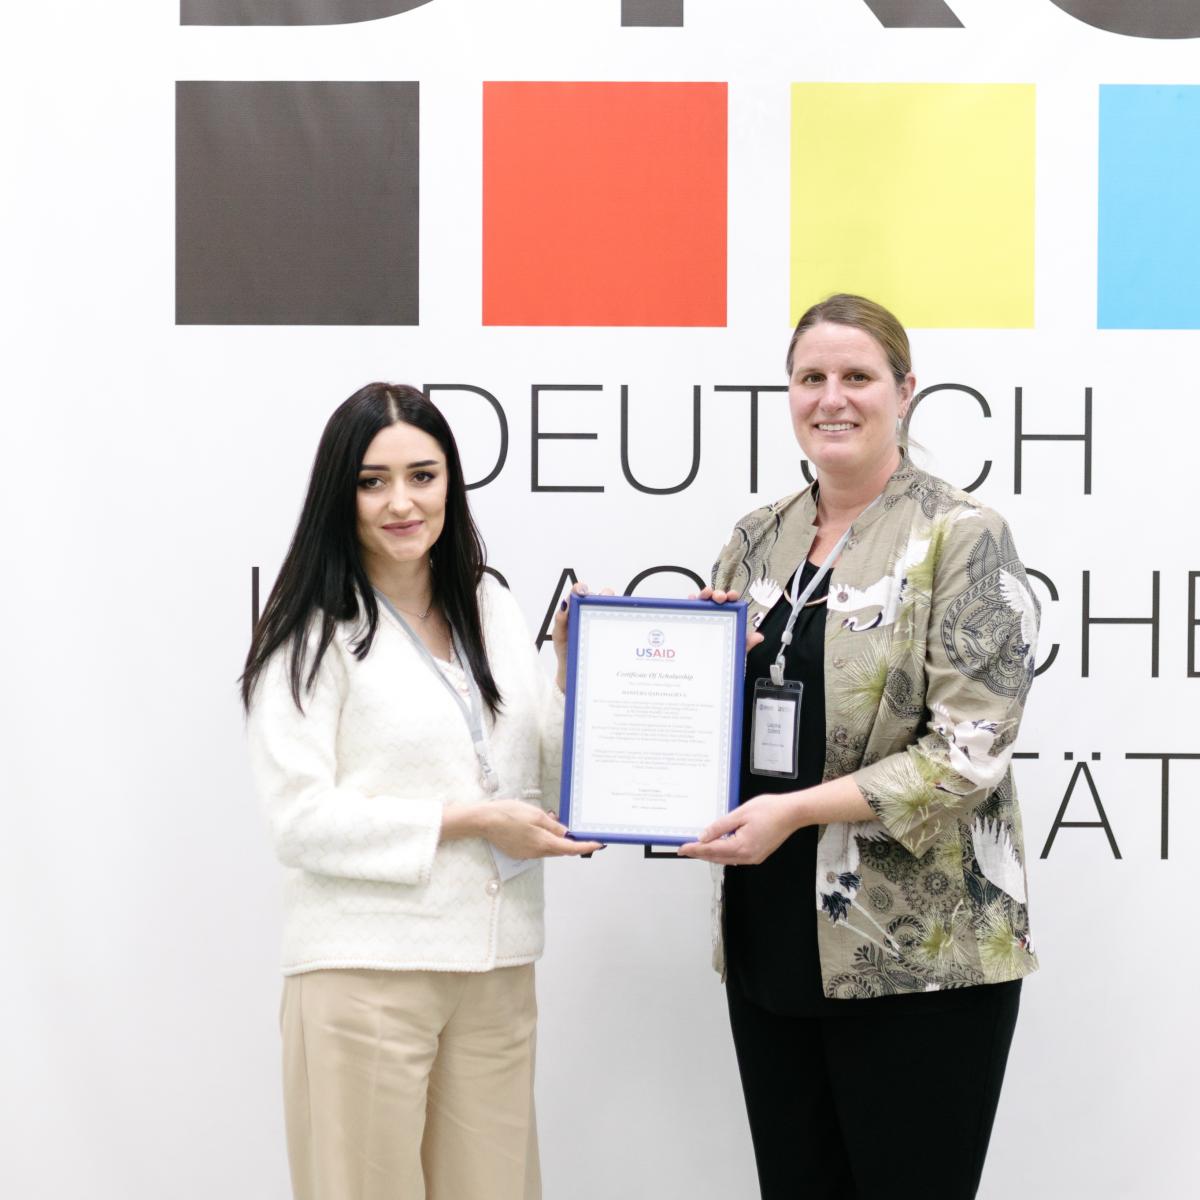 Manzura proudly receives a certificate from Laura Cizmo, USAID's Regional Economic Development Director 